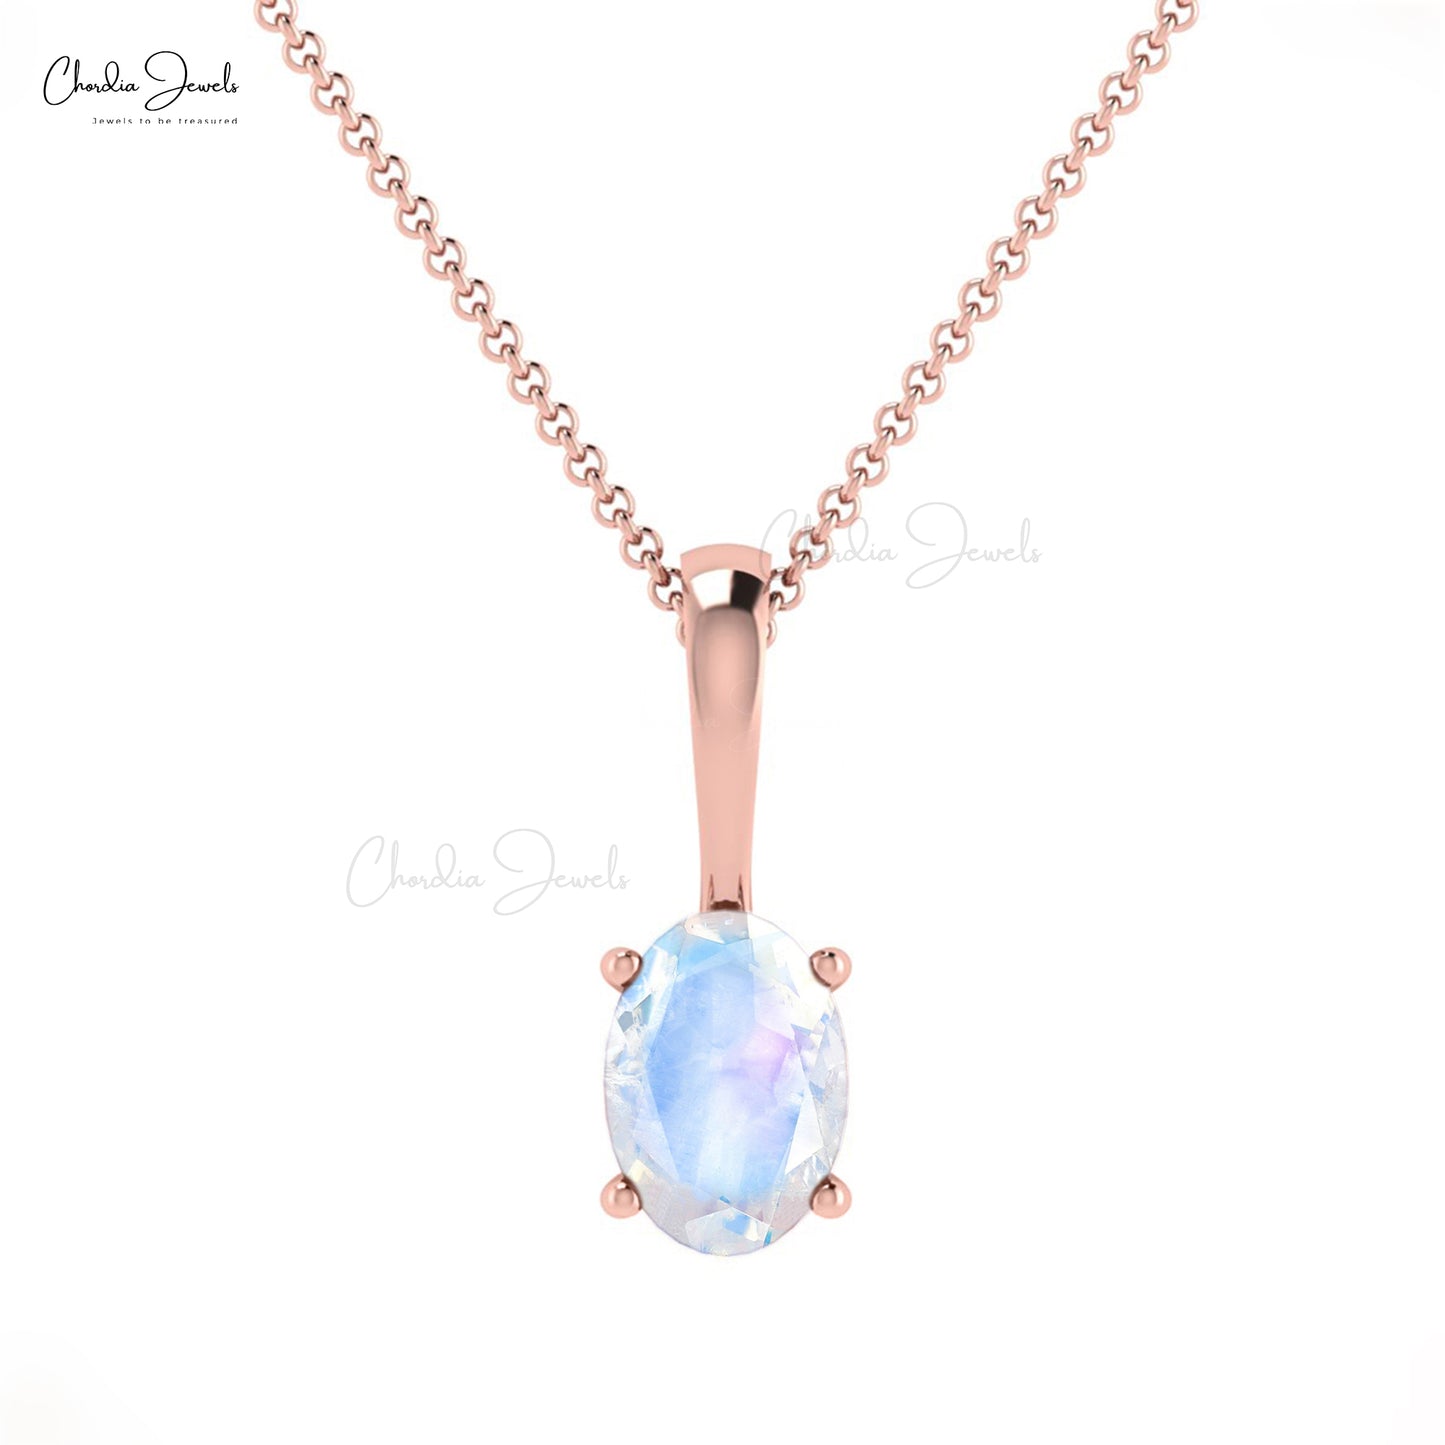 Delicate 0.28Ct Rainbow Moonstone Solitaire Pendant 14k Gold Oval Cut Gemstone Fine Jewelry